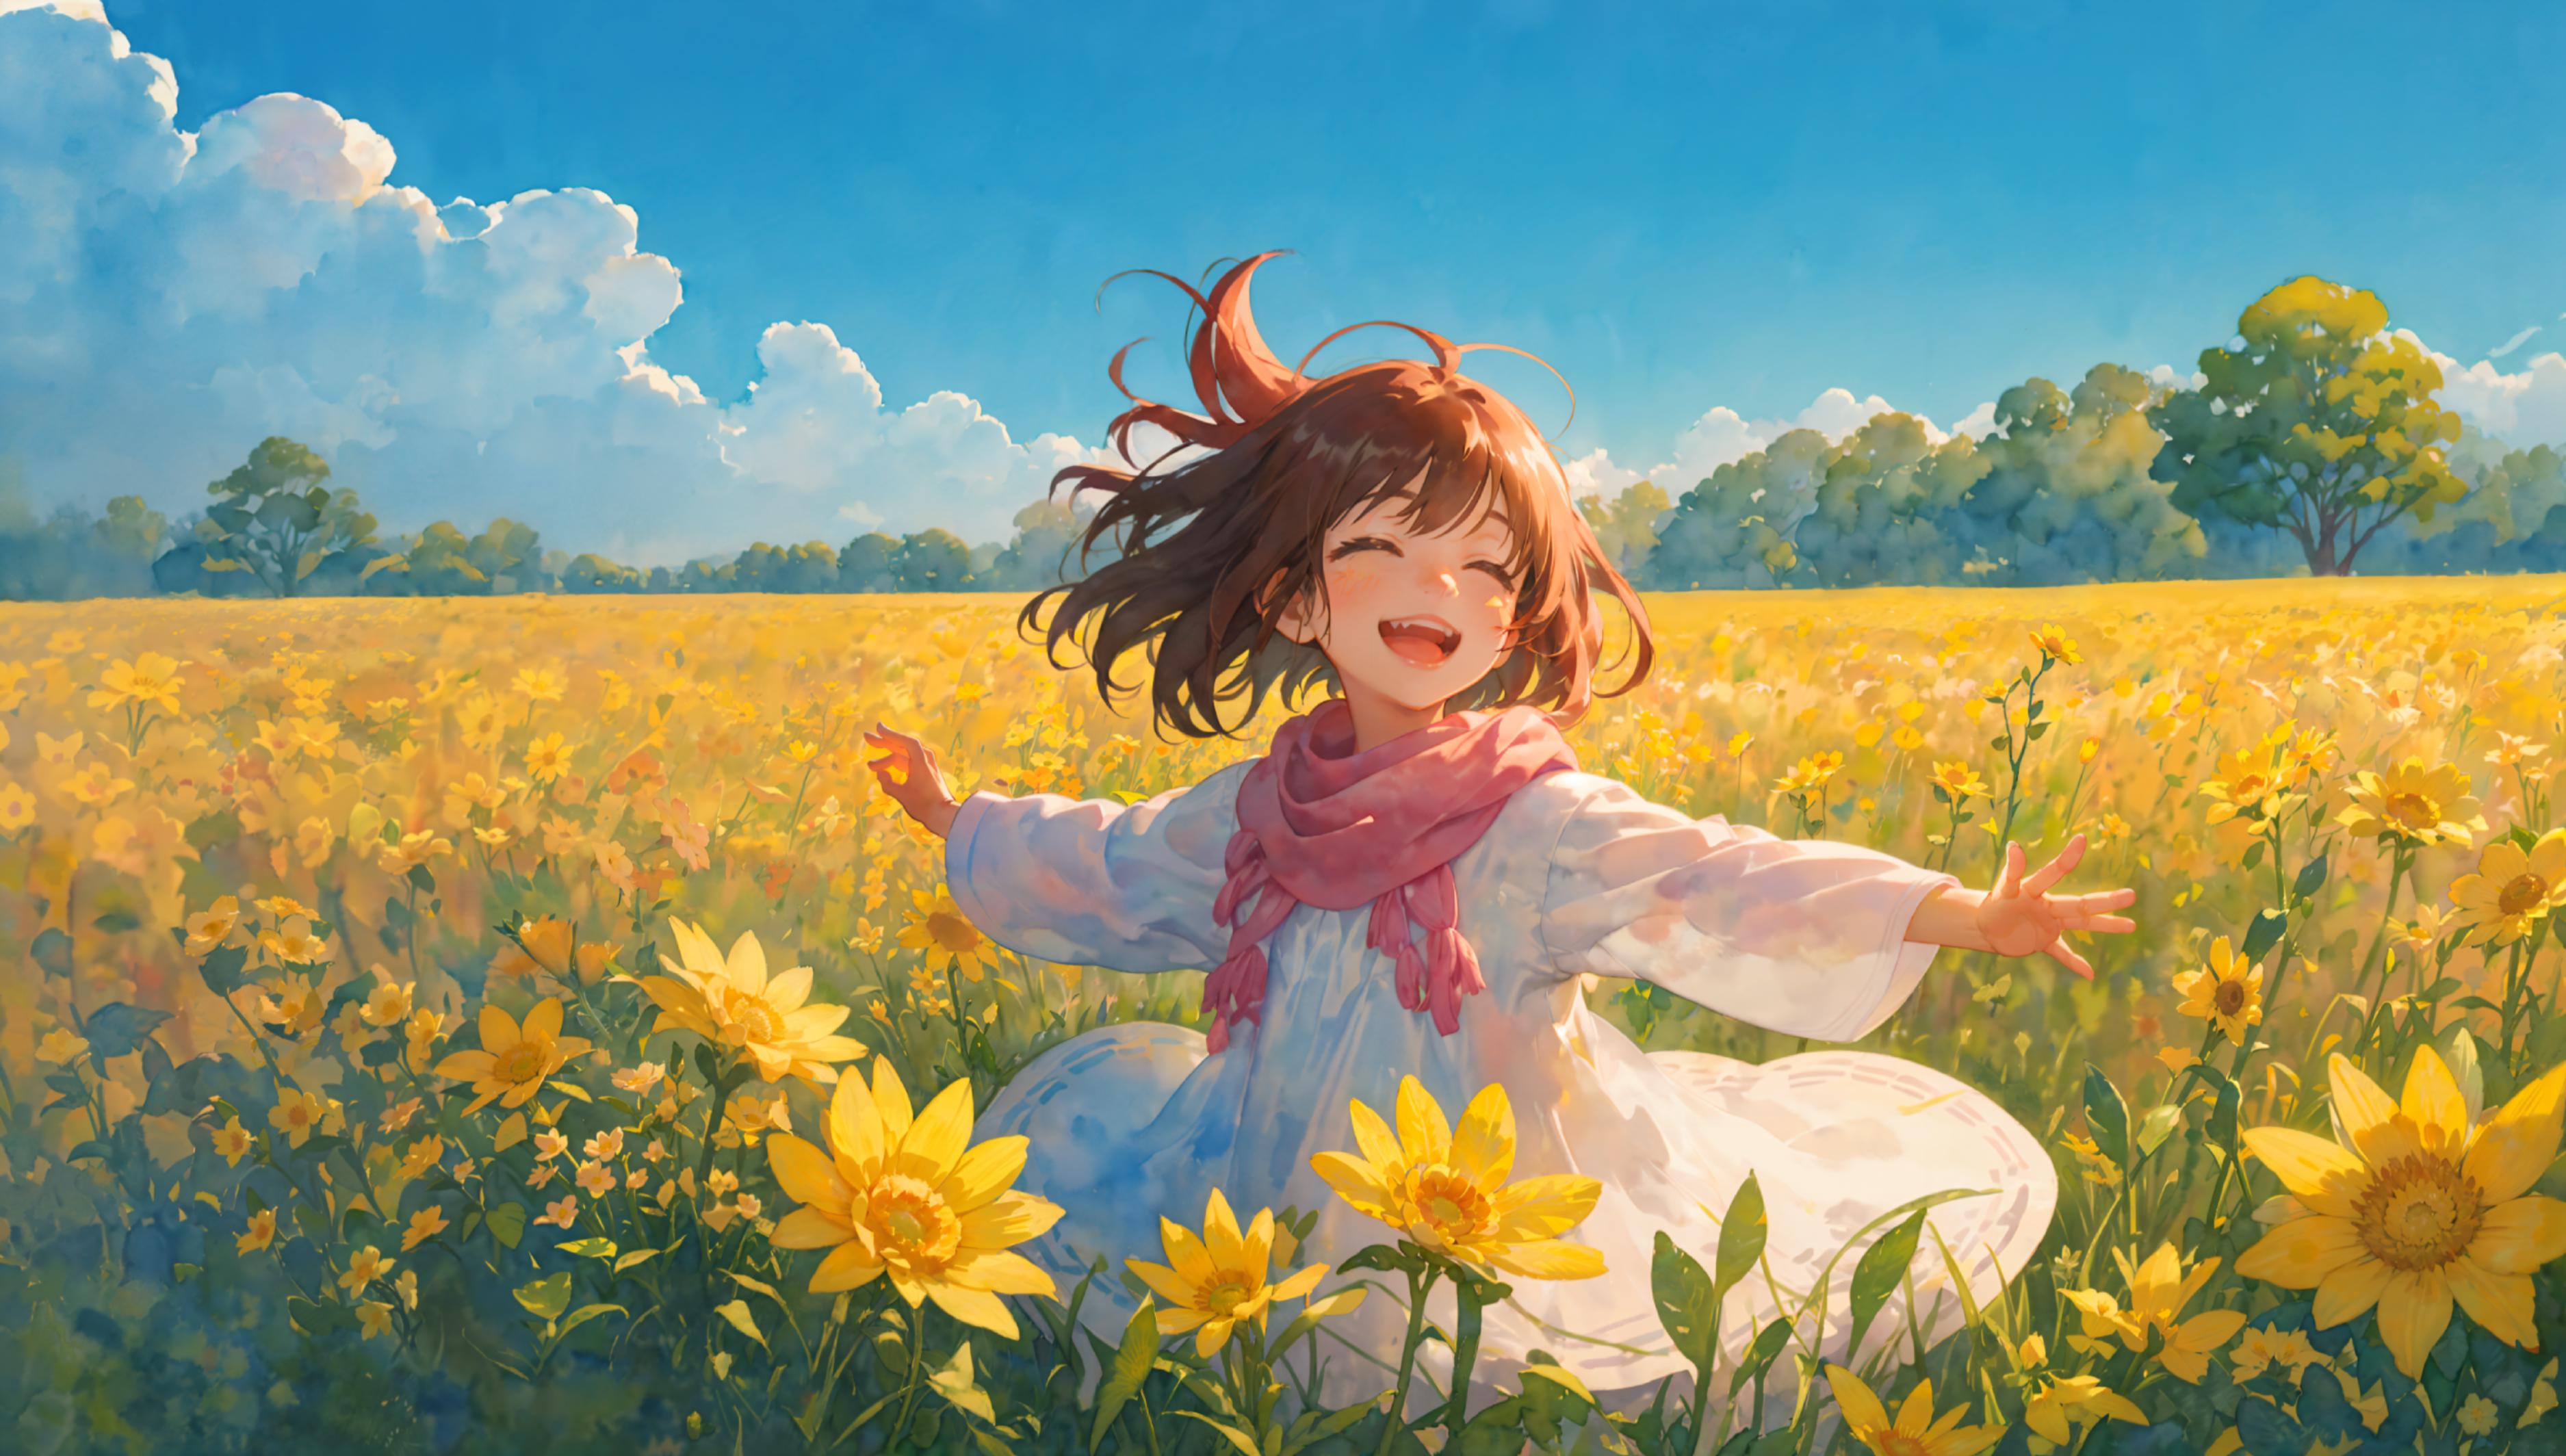 A happy little girl in a white dress playing in a field of flowers.